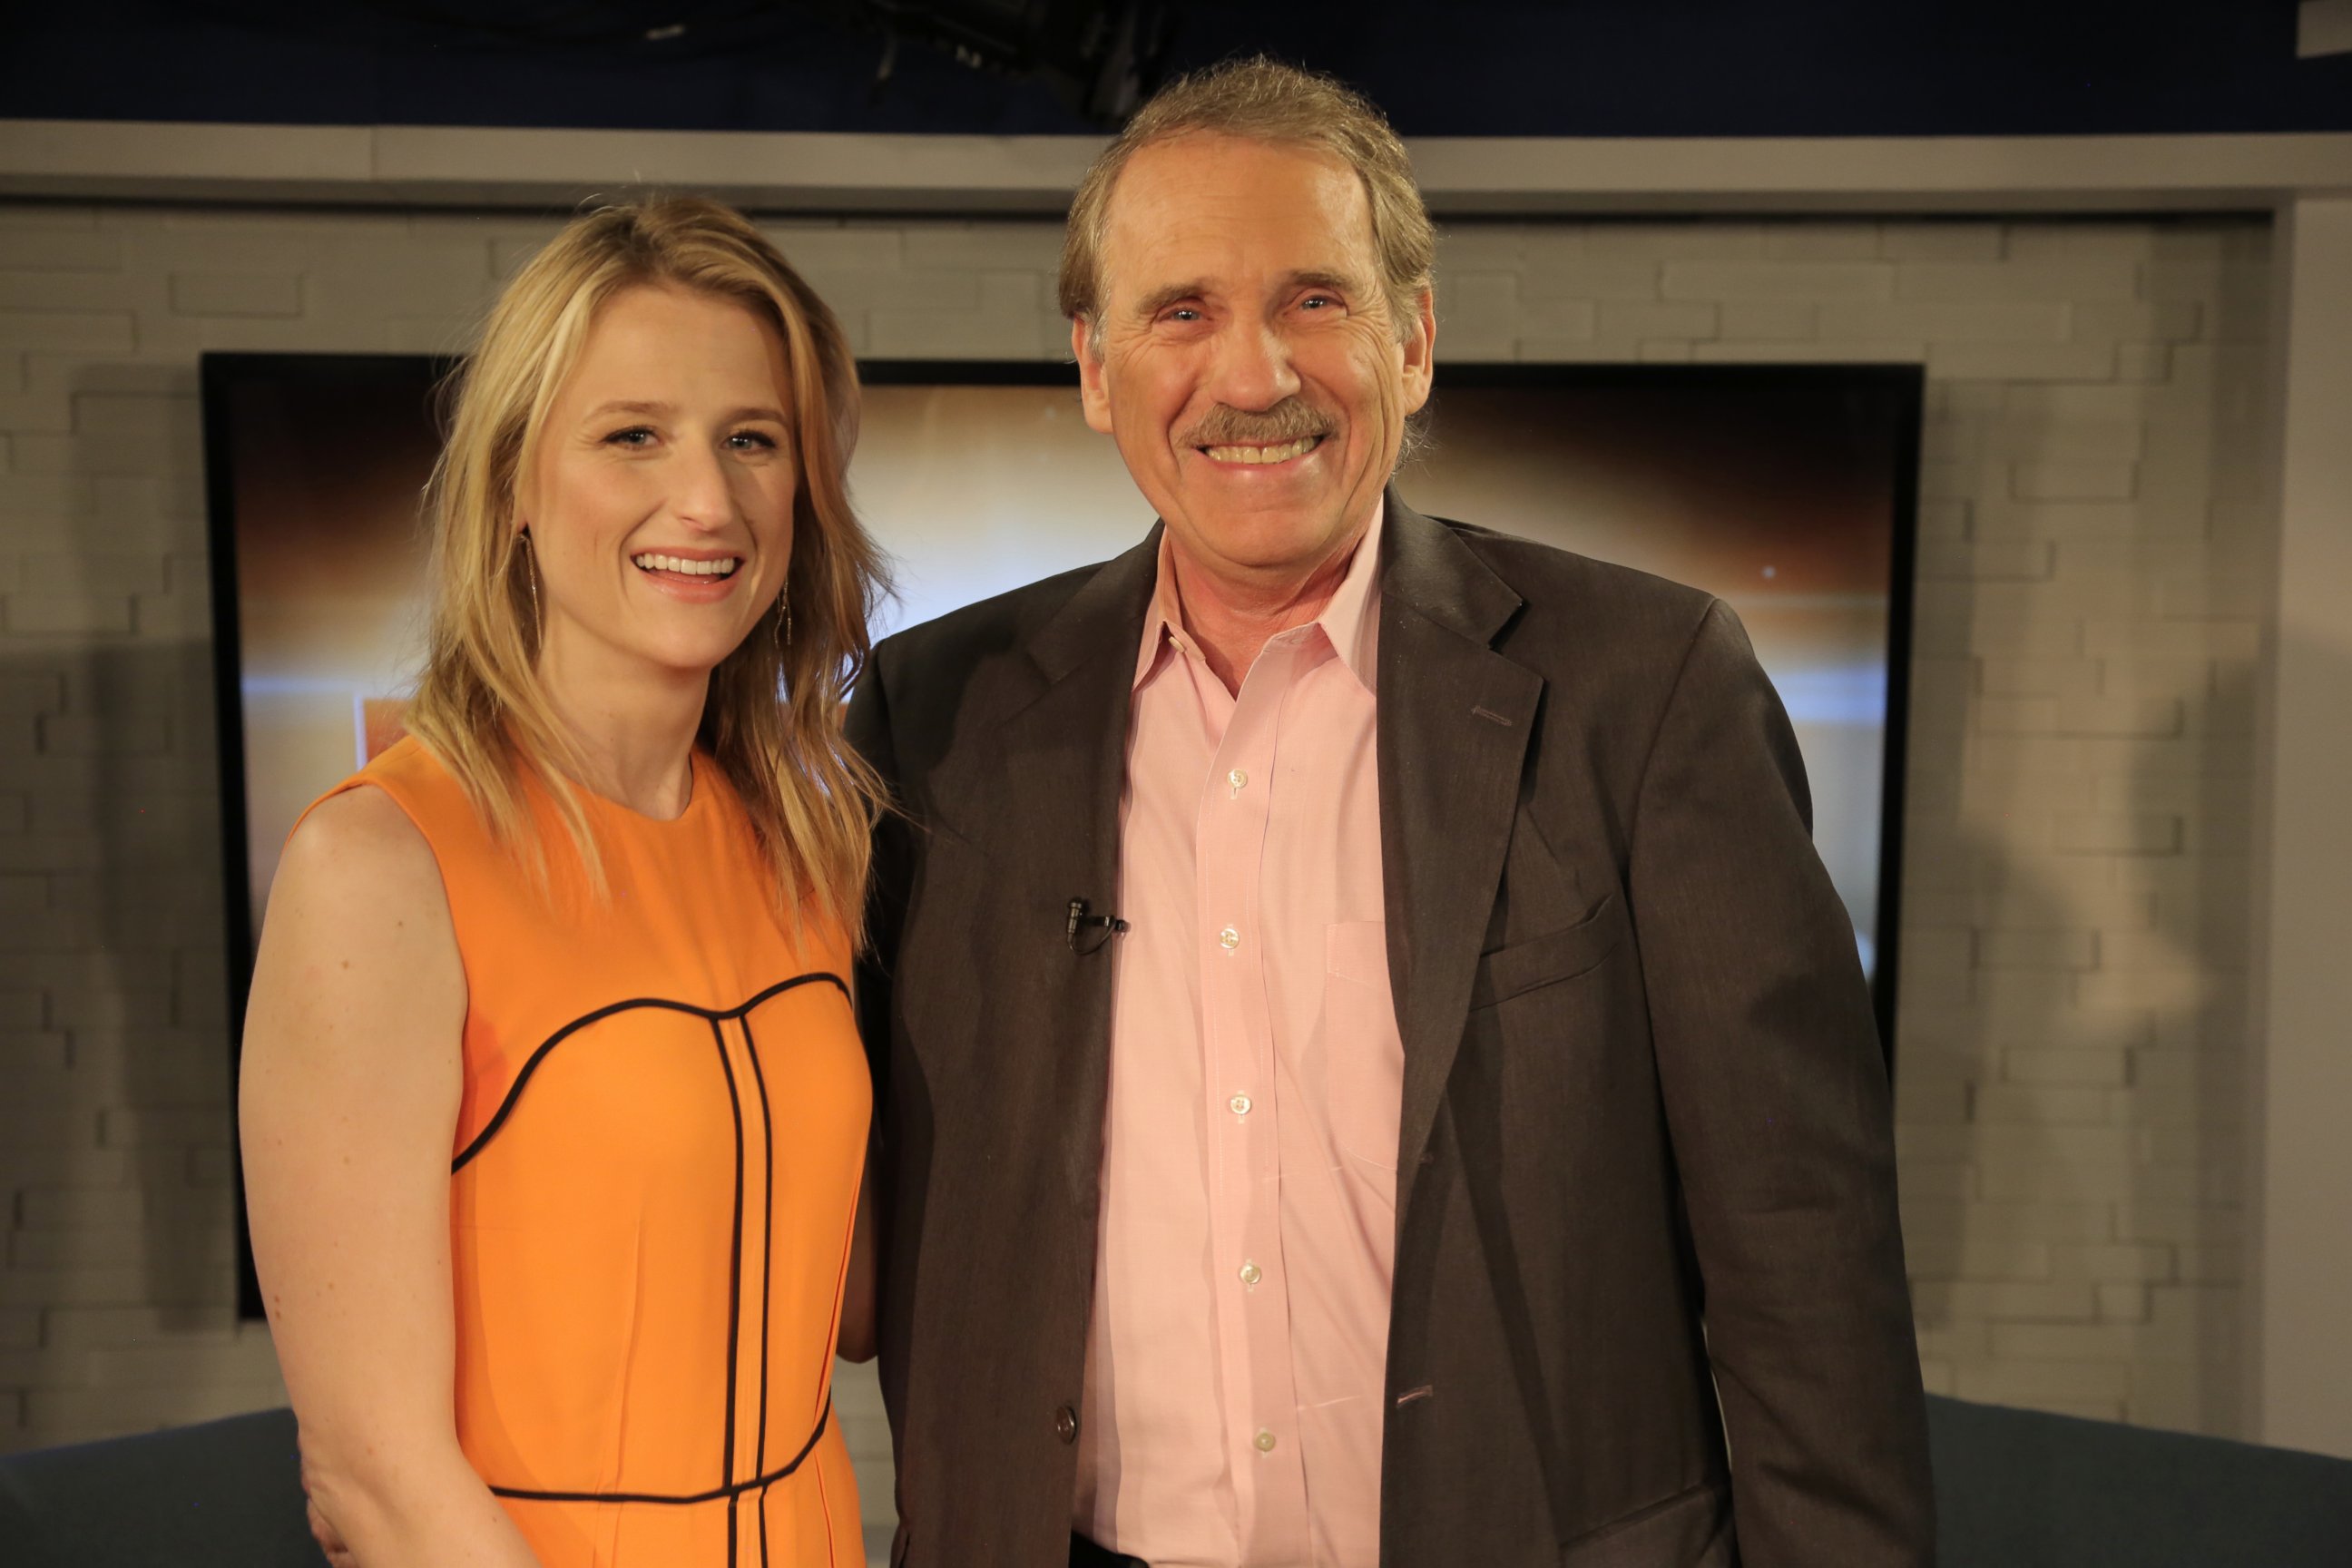 PHOTO: Mamie Gummer and Peter Travers are seen here.